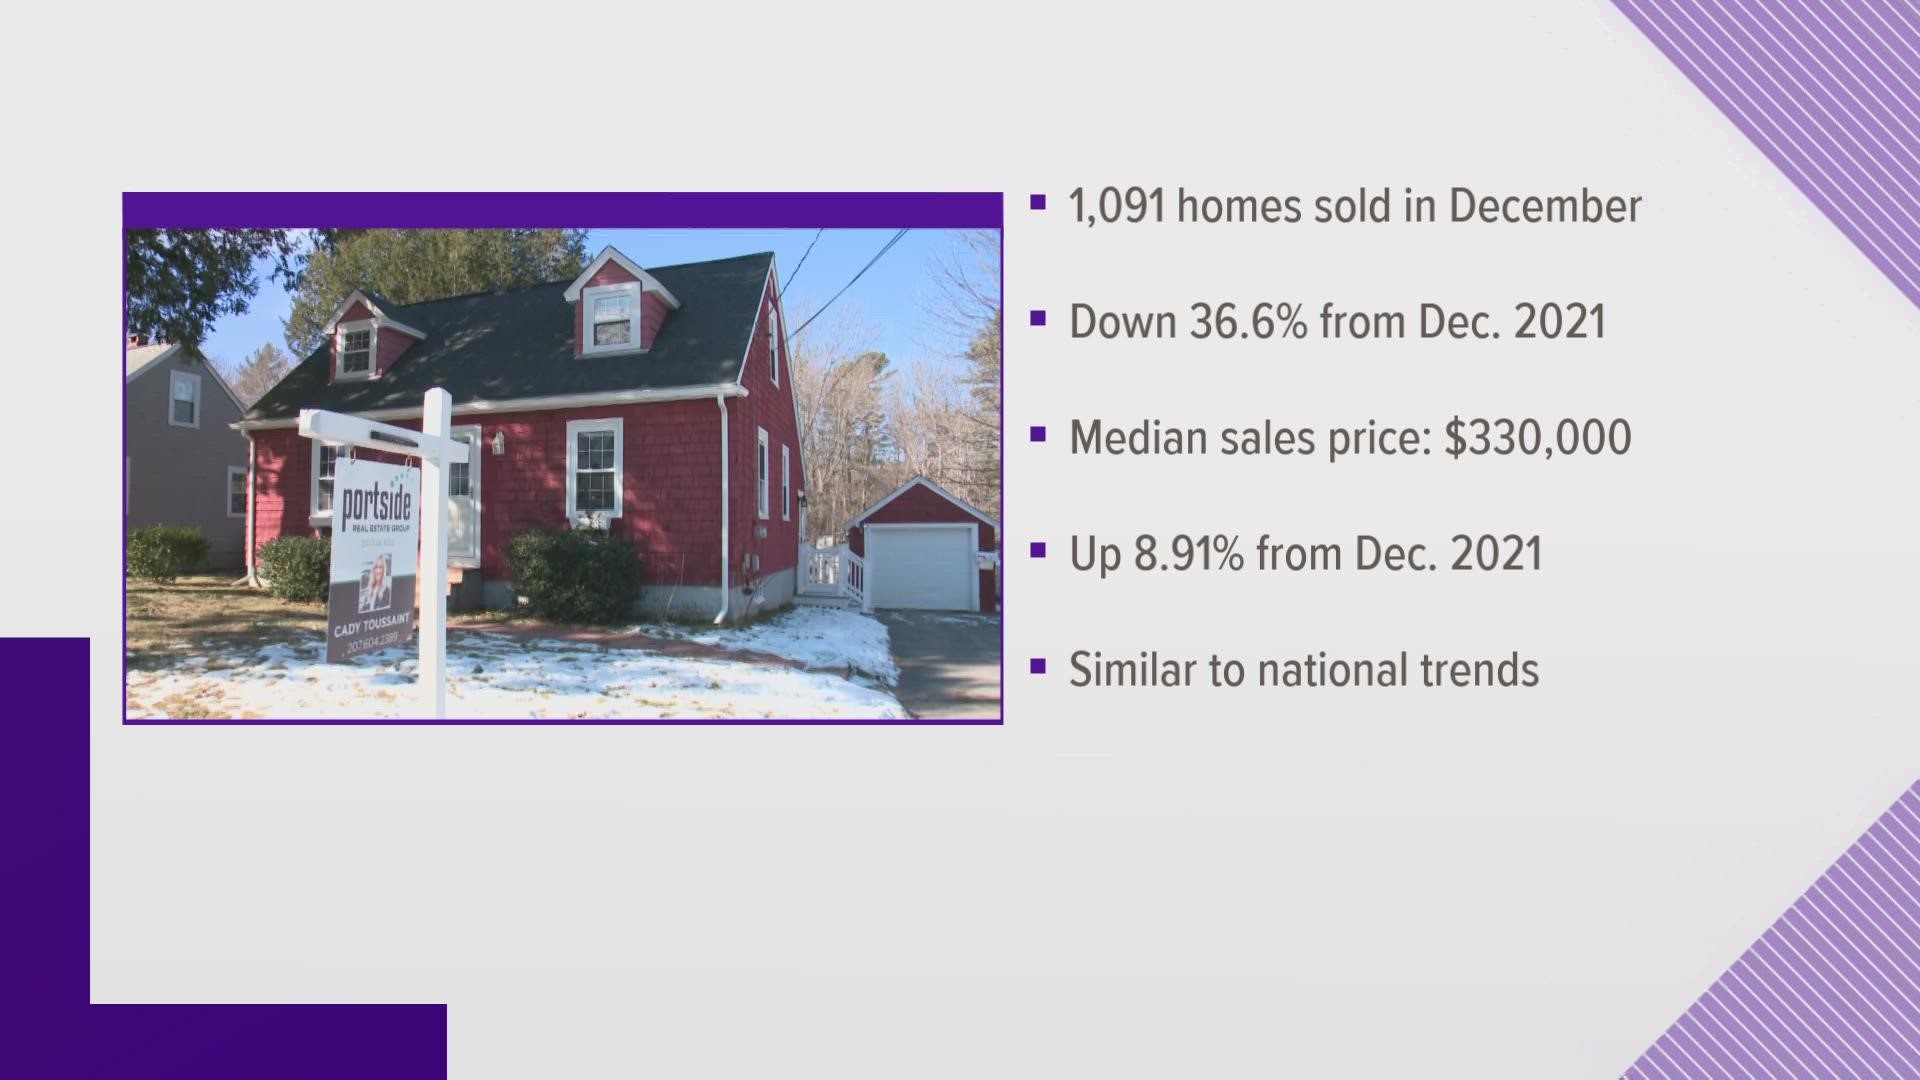 According to the National Association of REALTORS, 1091 homes were sold in Maine during December, down 36.6 percent from that time in 2021.